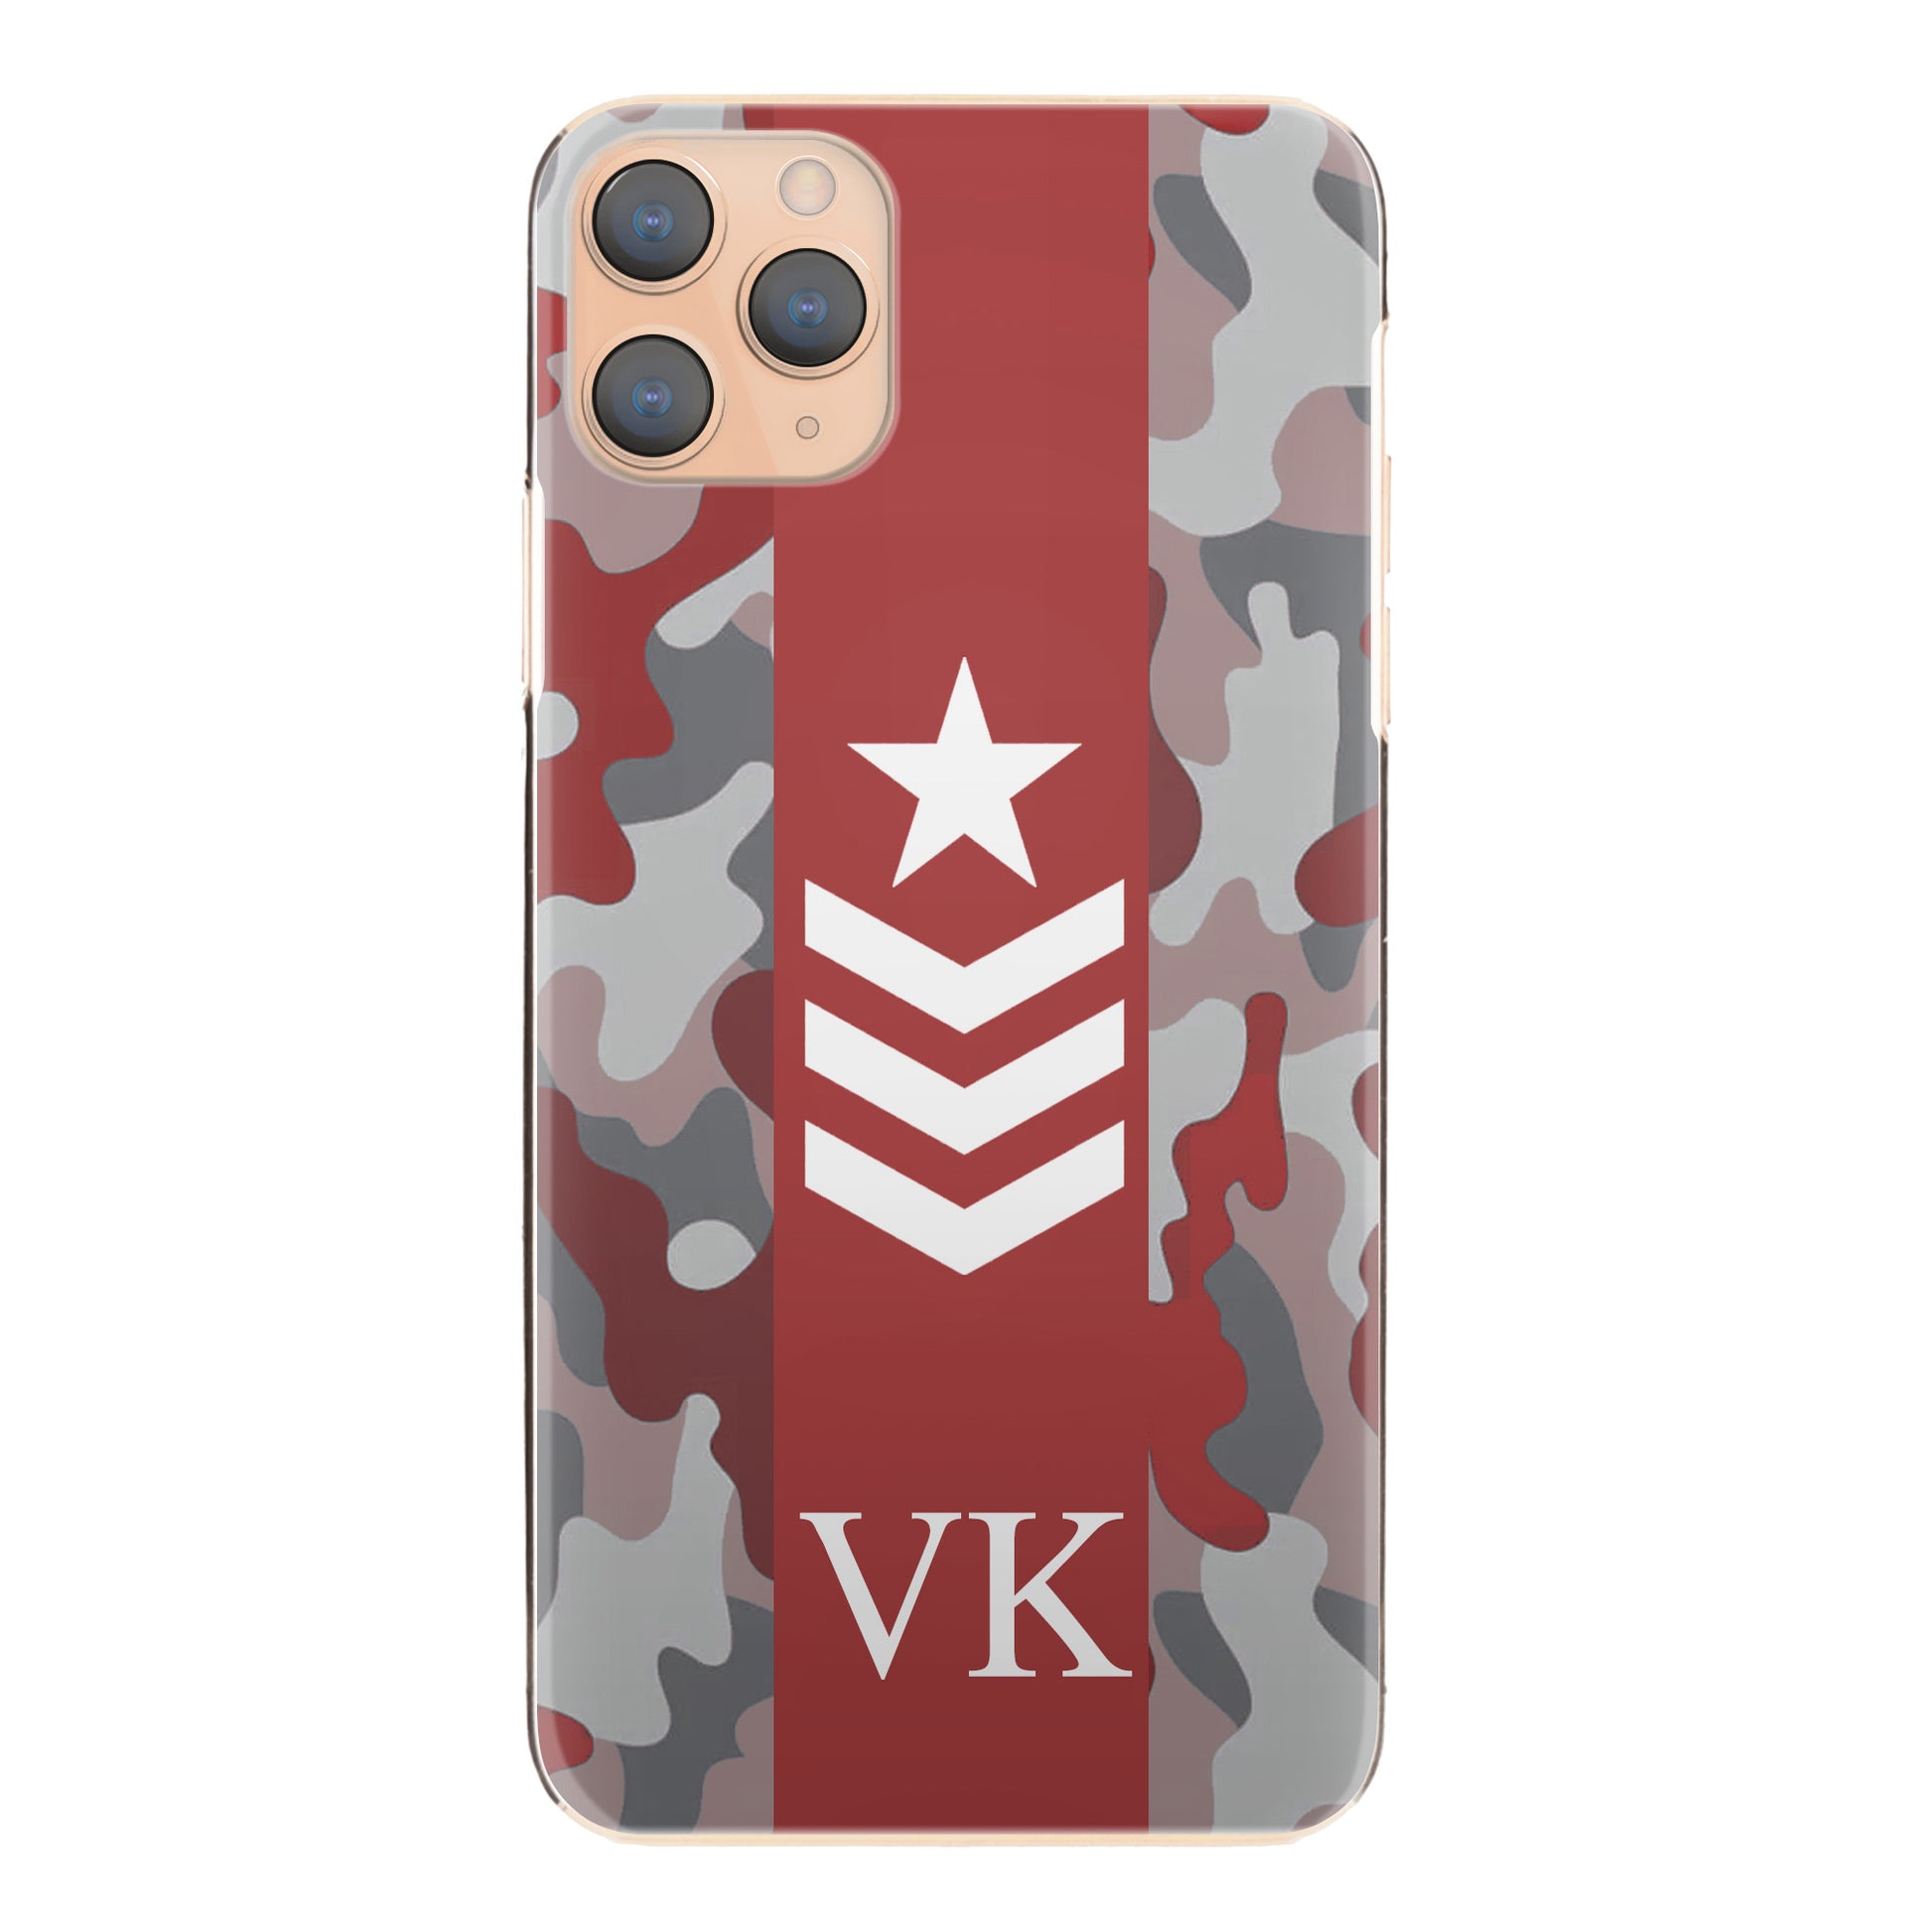 Personalised Honor Phone Hard Case with Initials and Army Rank on Red Camo